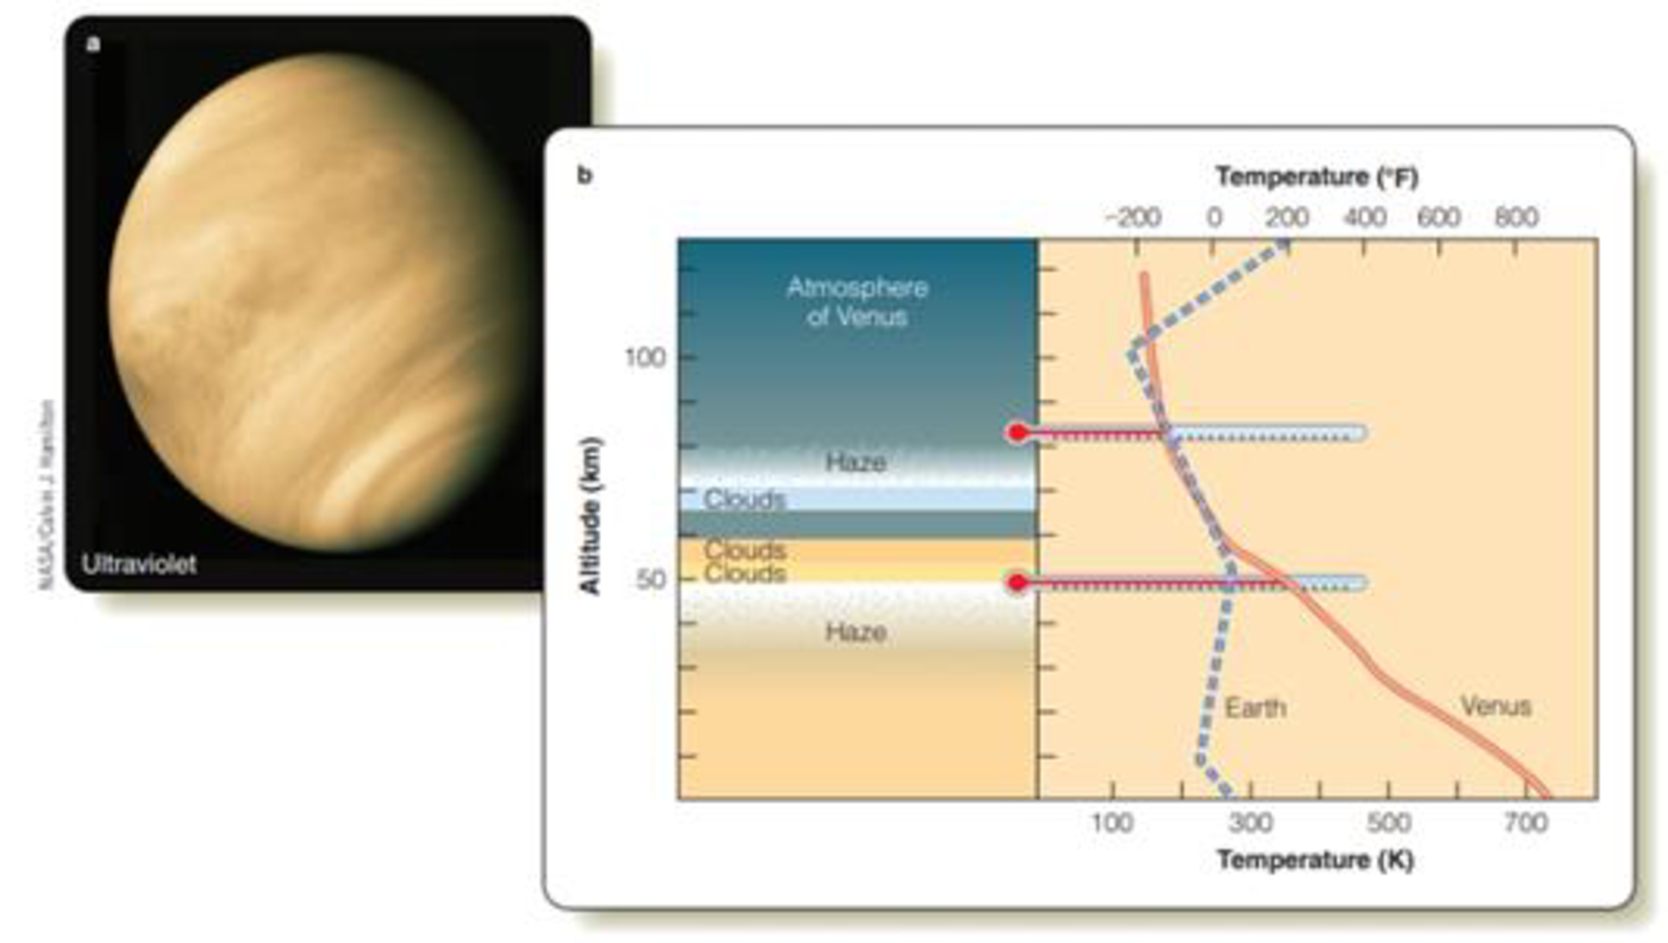 Chapter 22, Problem 1LTL, Look at Figure 21-1. Compare temperature profiles of Venuss and Earths atmospheres. Describe the 